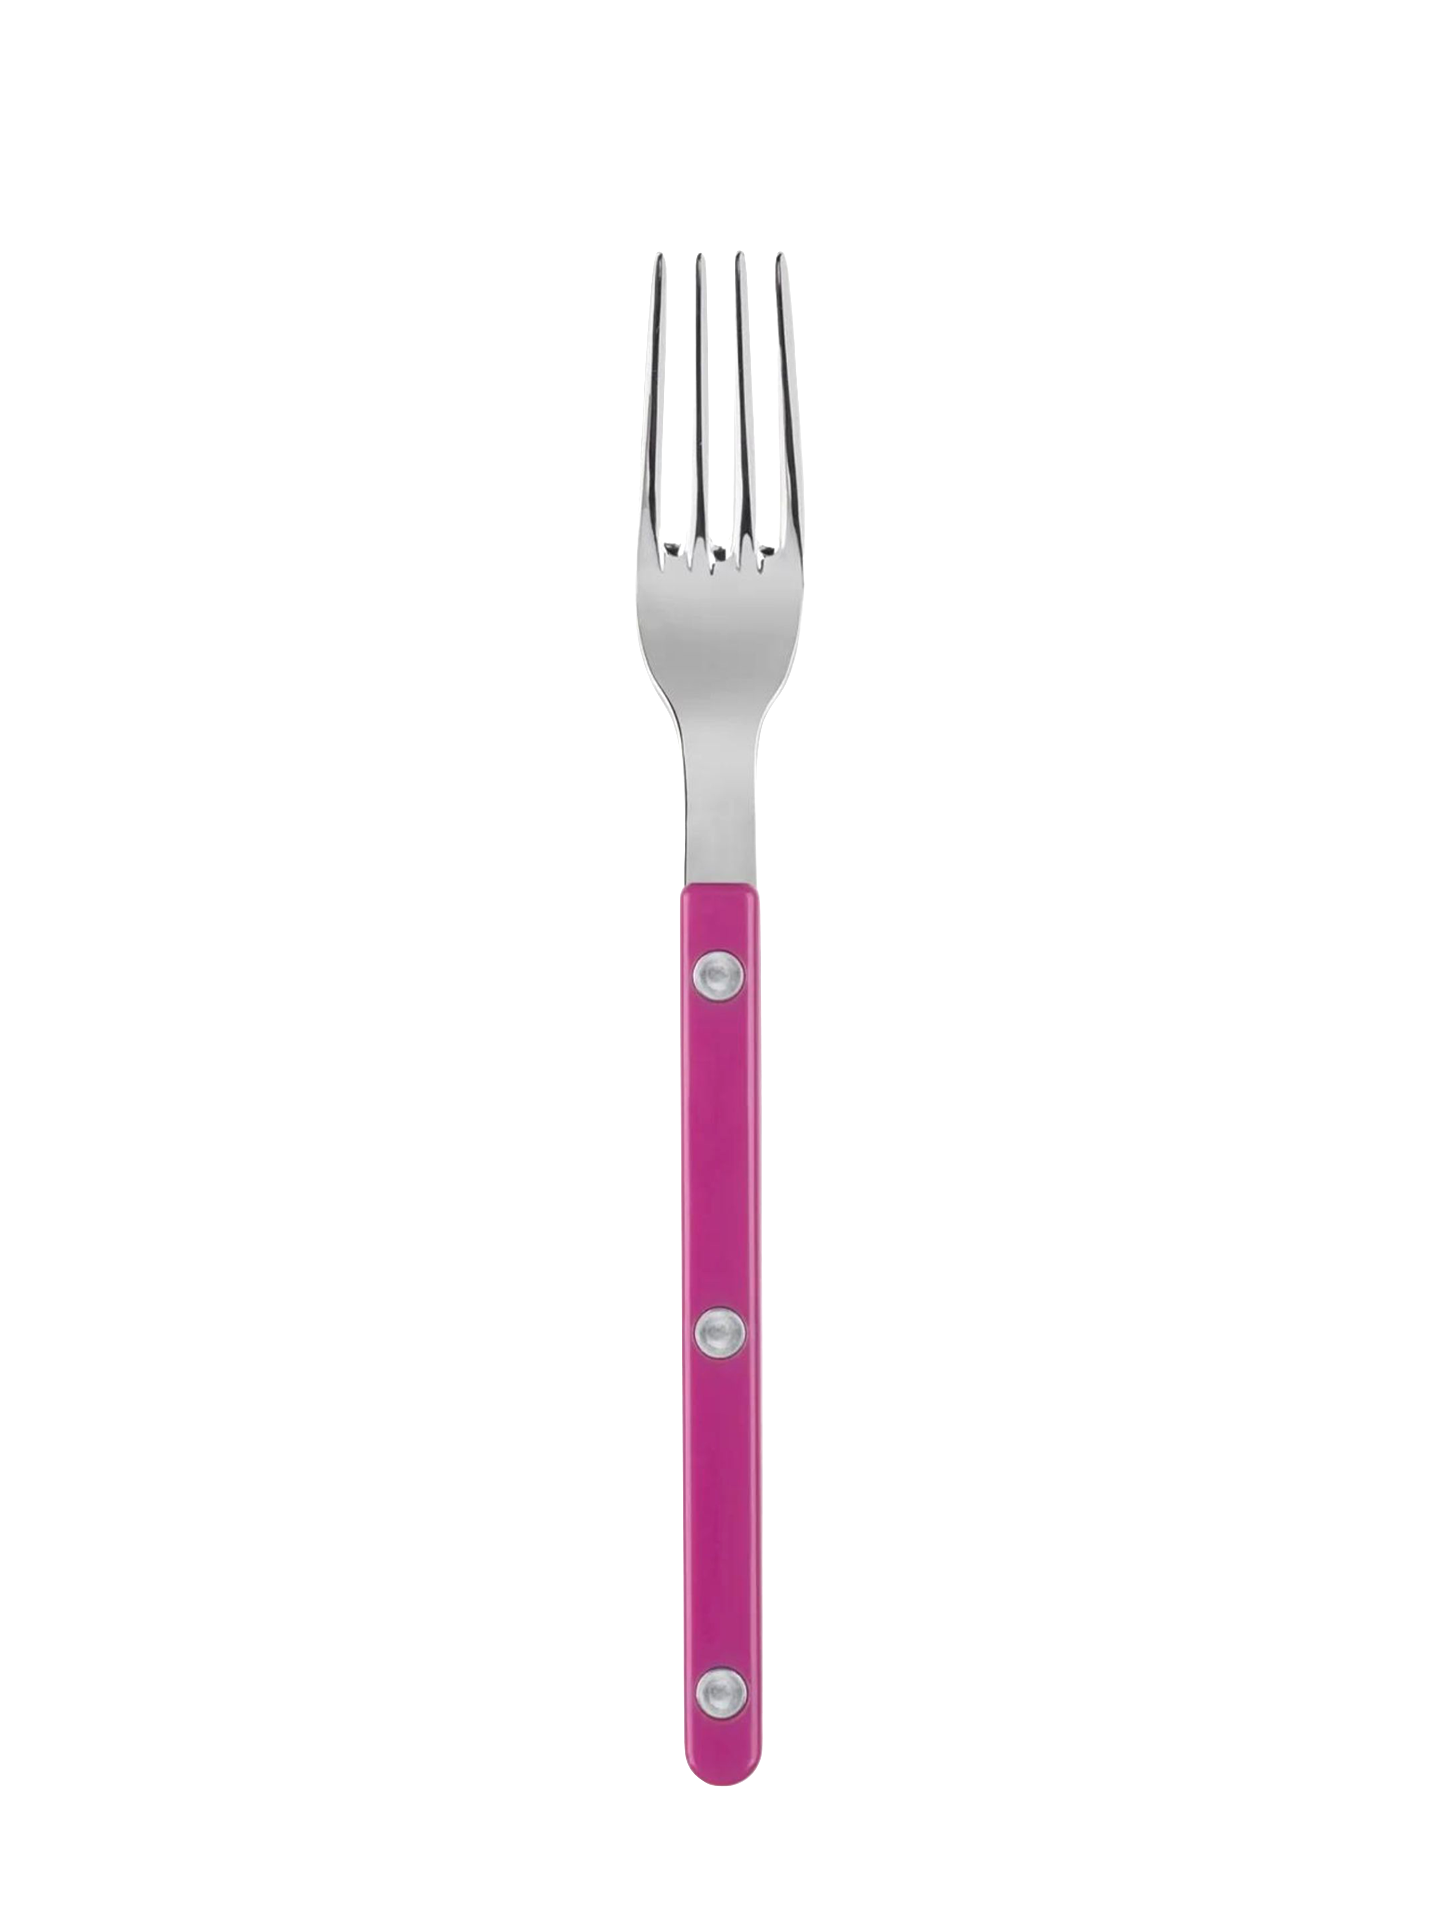 The dinner fork from the Bistrot collection in raspberry pink is a new interpretation from the cutleries of the Parisian cafés and bistros. Cute as a button, but utilitarian and minimalist otherwise, this will fit perfectly with contemporary looks with just little mouthful of French chic.